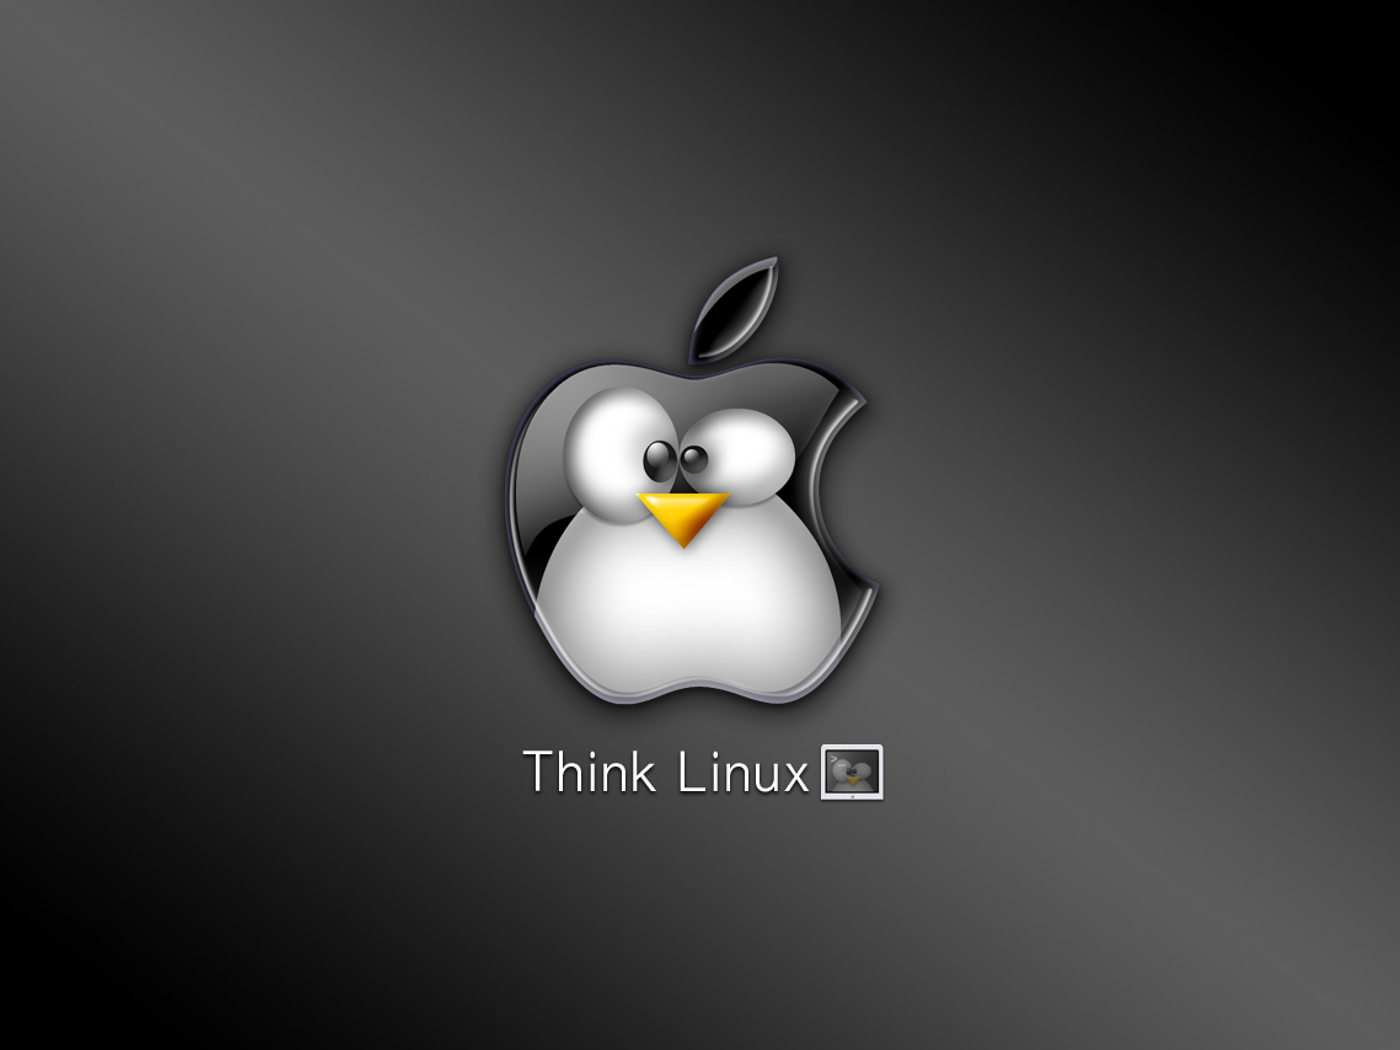 Funny Linux Wallpapers on Linux Computer Os Operating System Funny Penguin Hd Wallpaper Of